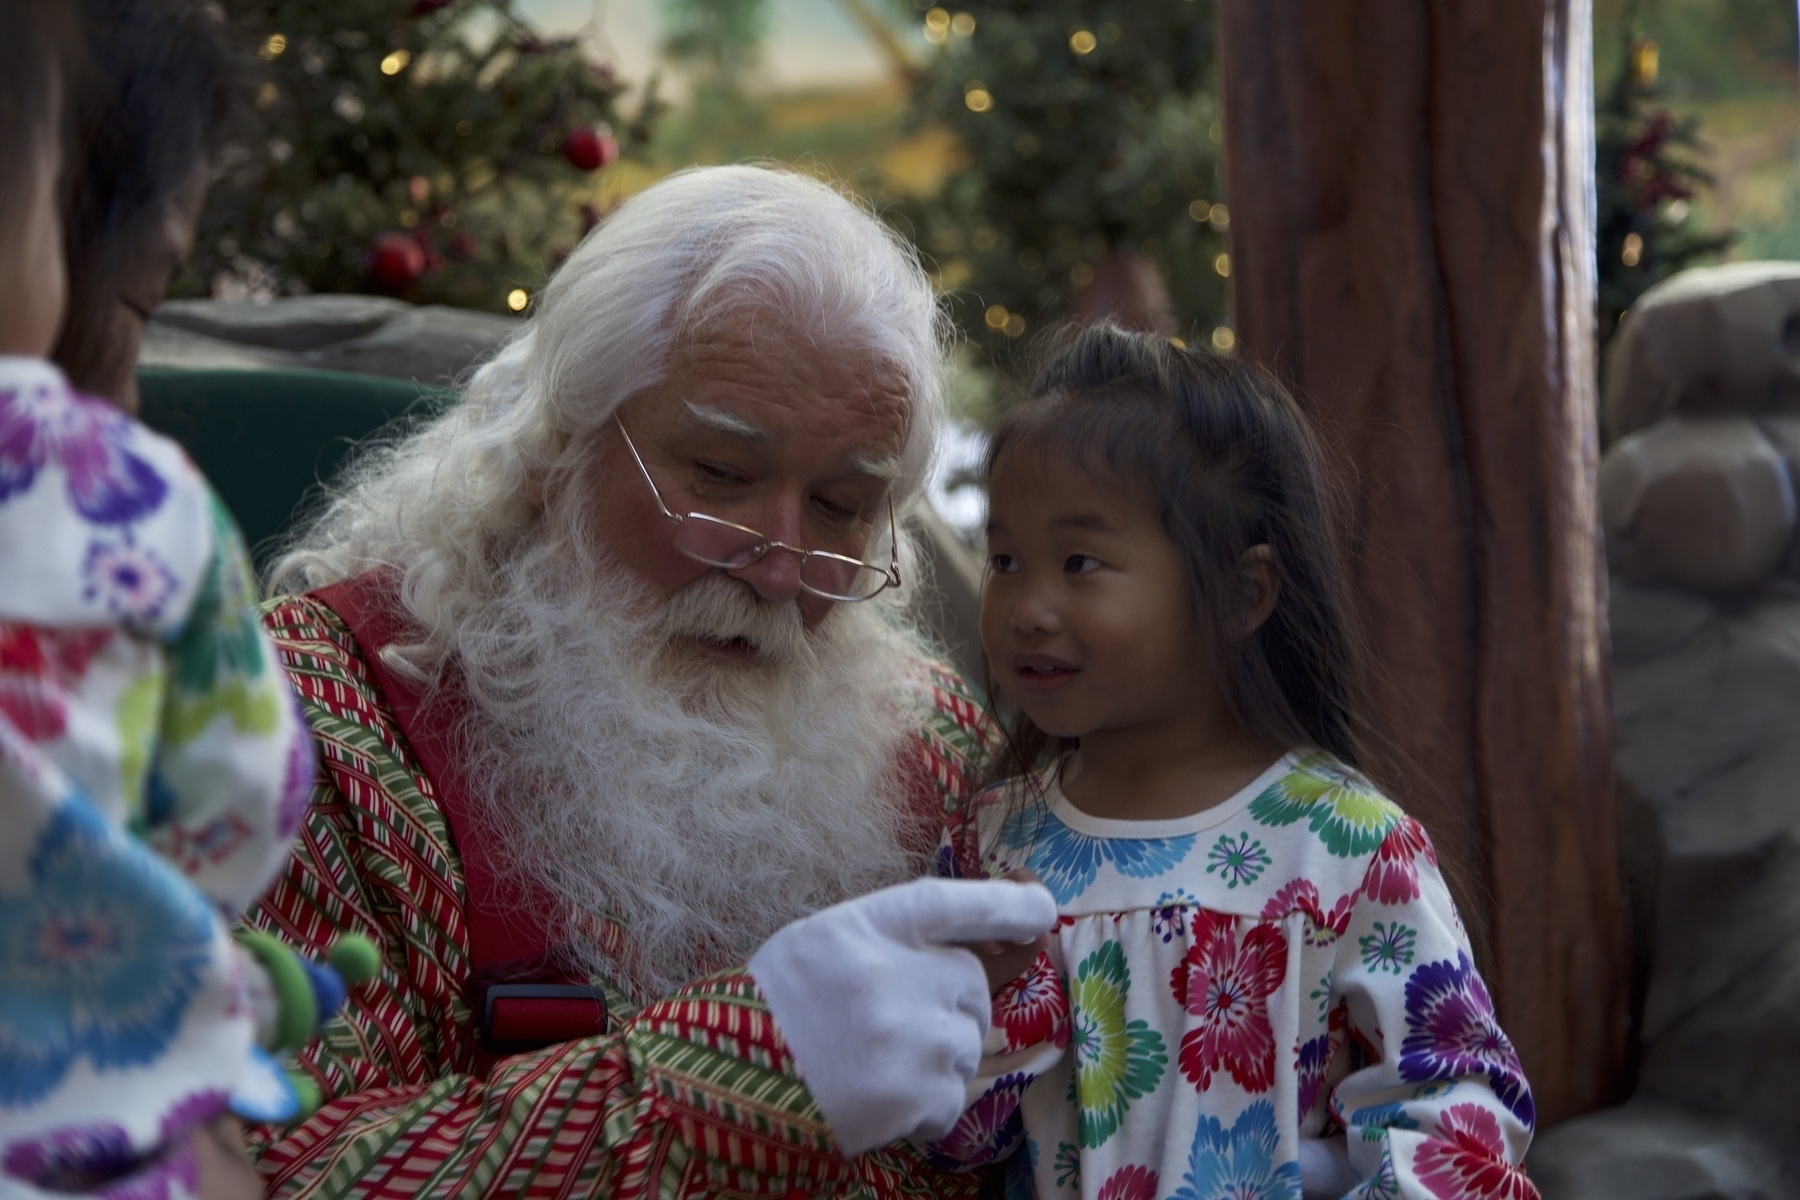 Mia tells Santa she wishes for this year.